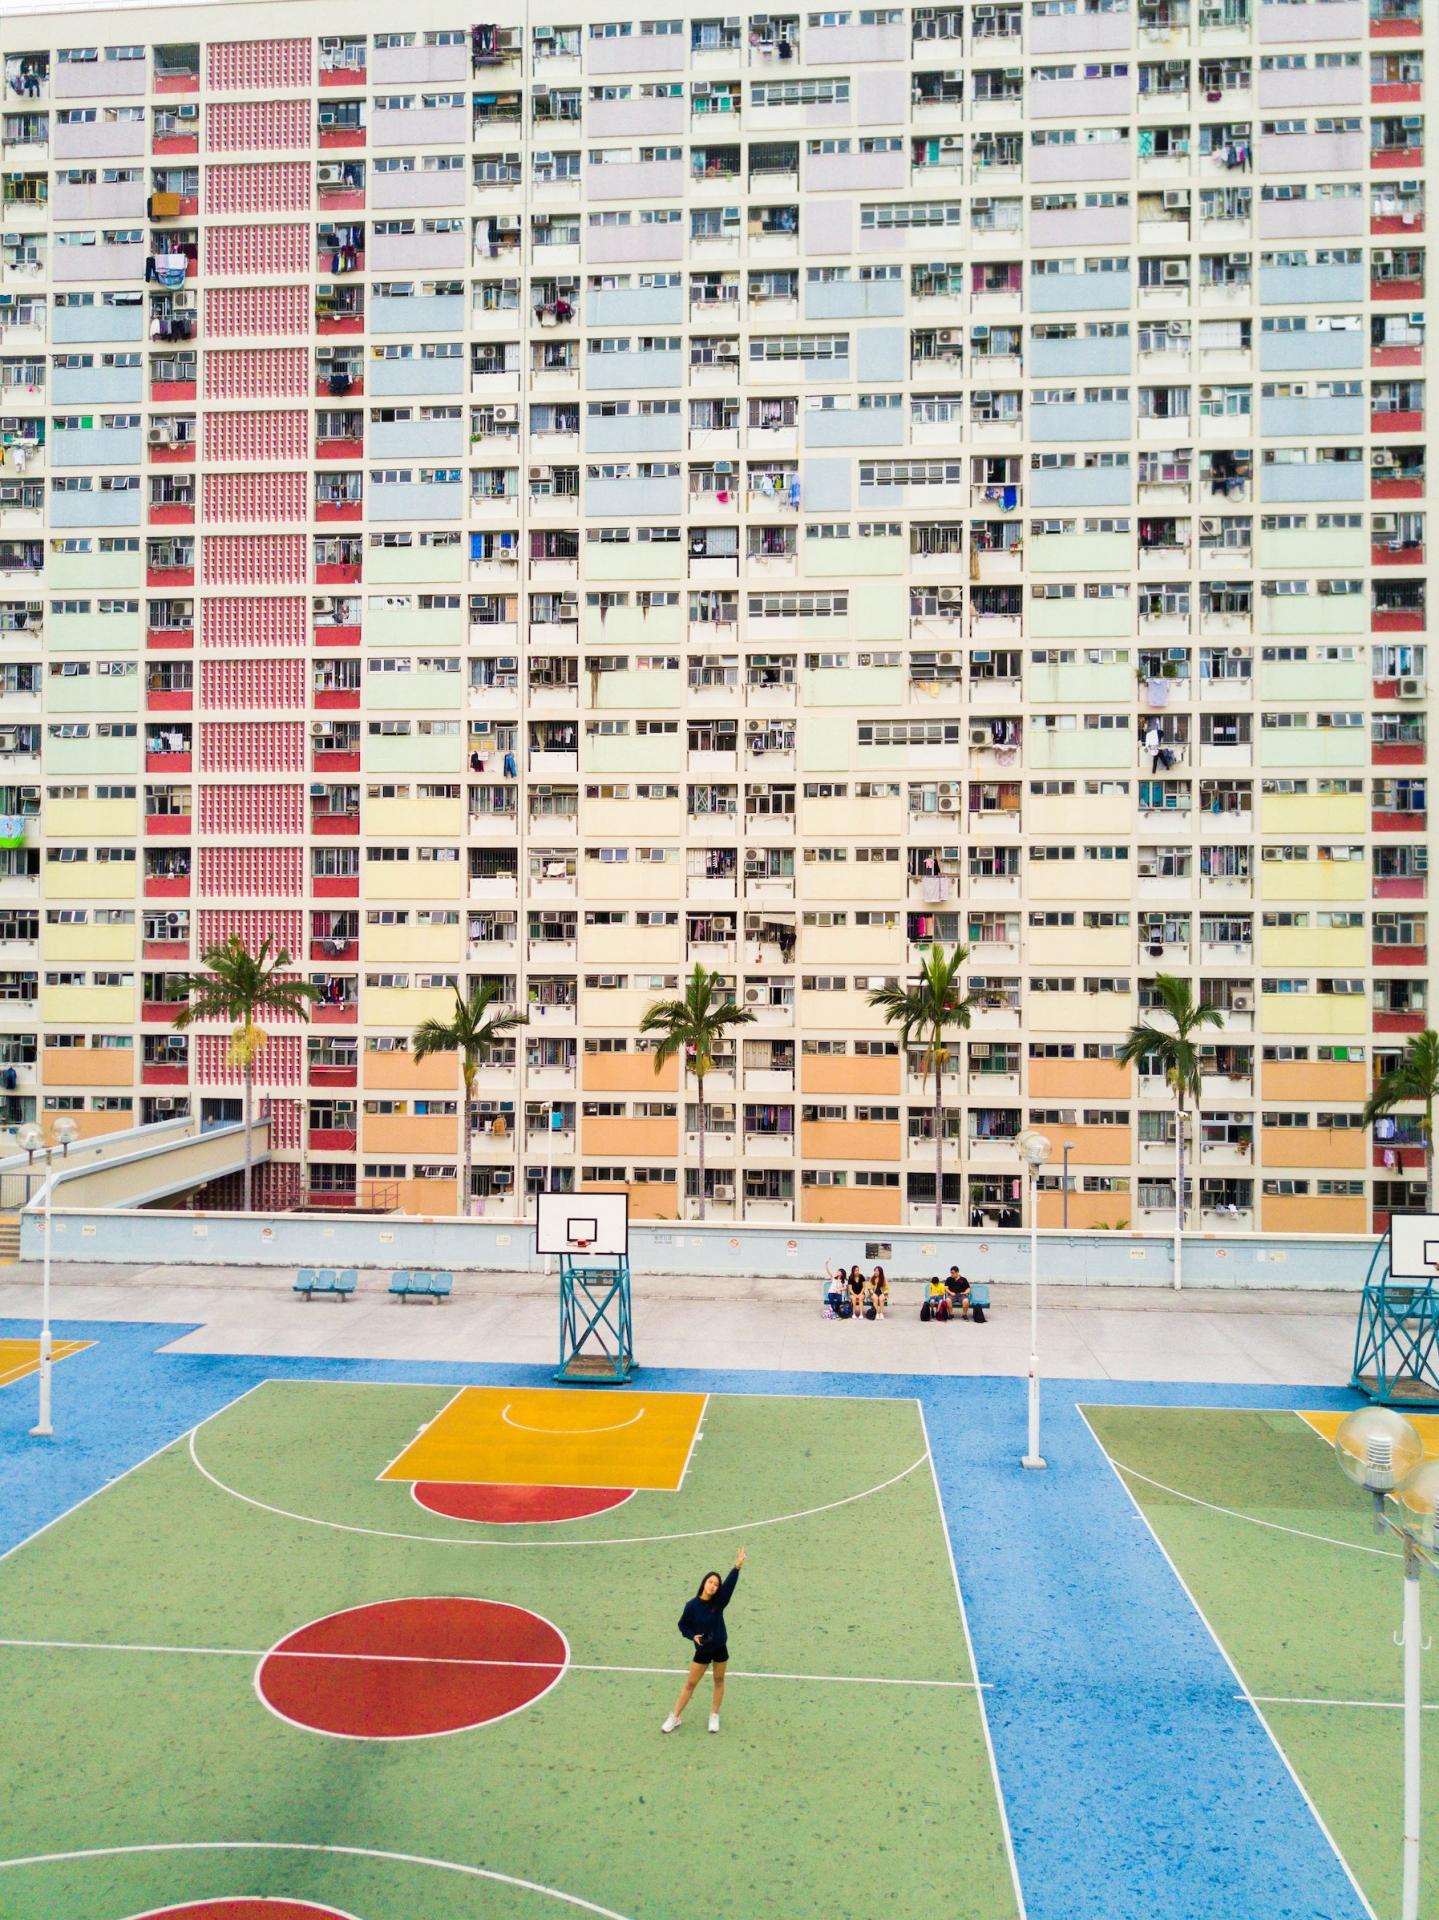 Hong Kong's Instagram-Famous Choi Hung Estate Slated For Redevelopment